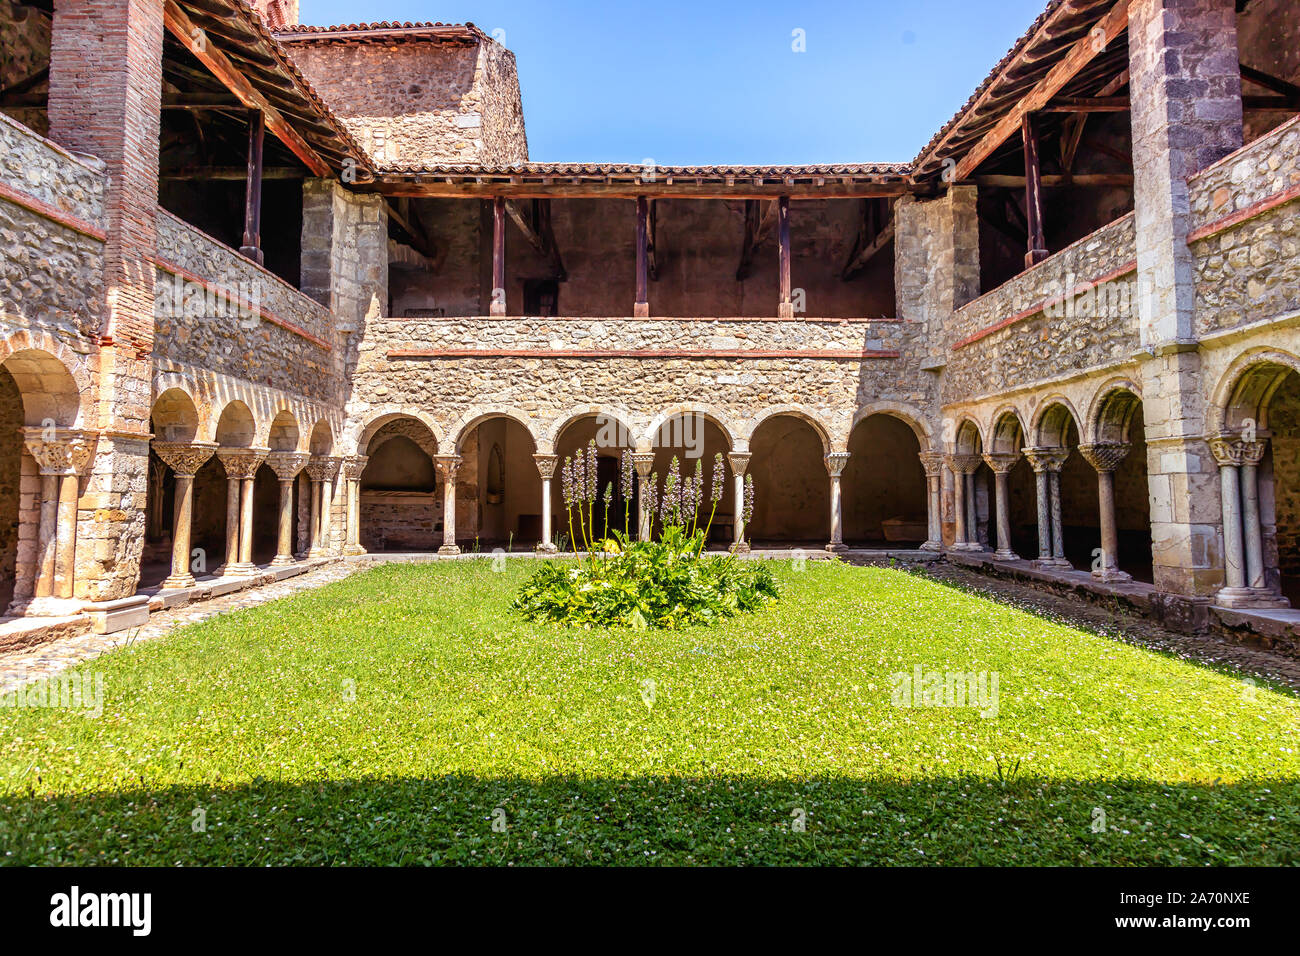 29 June 2019 Cloister of the Saint Lizier Cathedral, Ariège department, Pyrenees, Occitanie, France Stock Photo